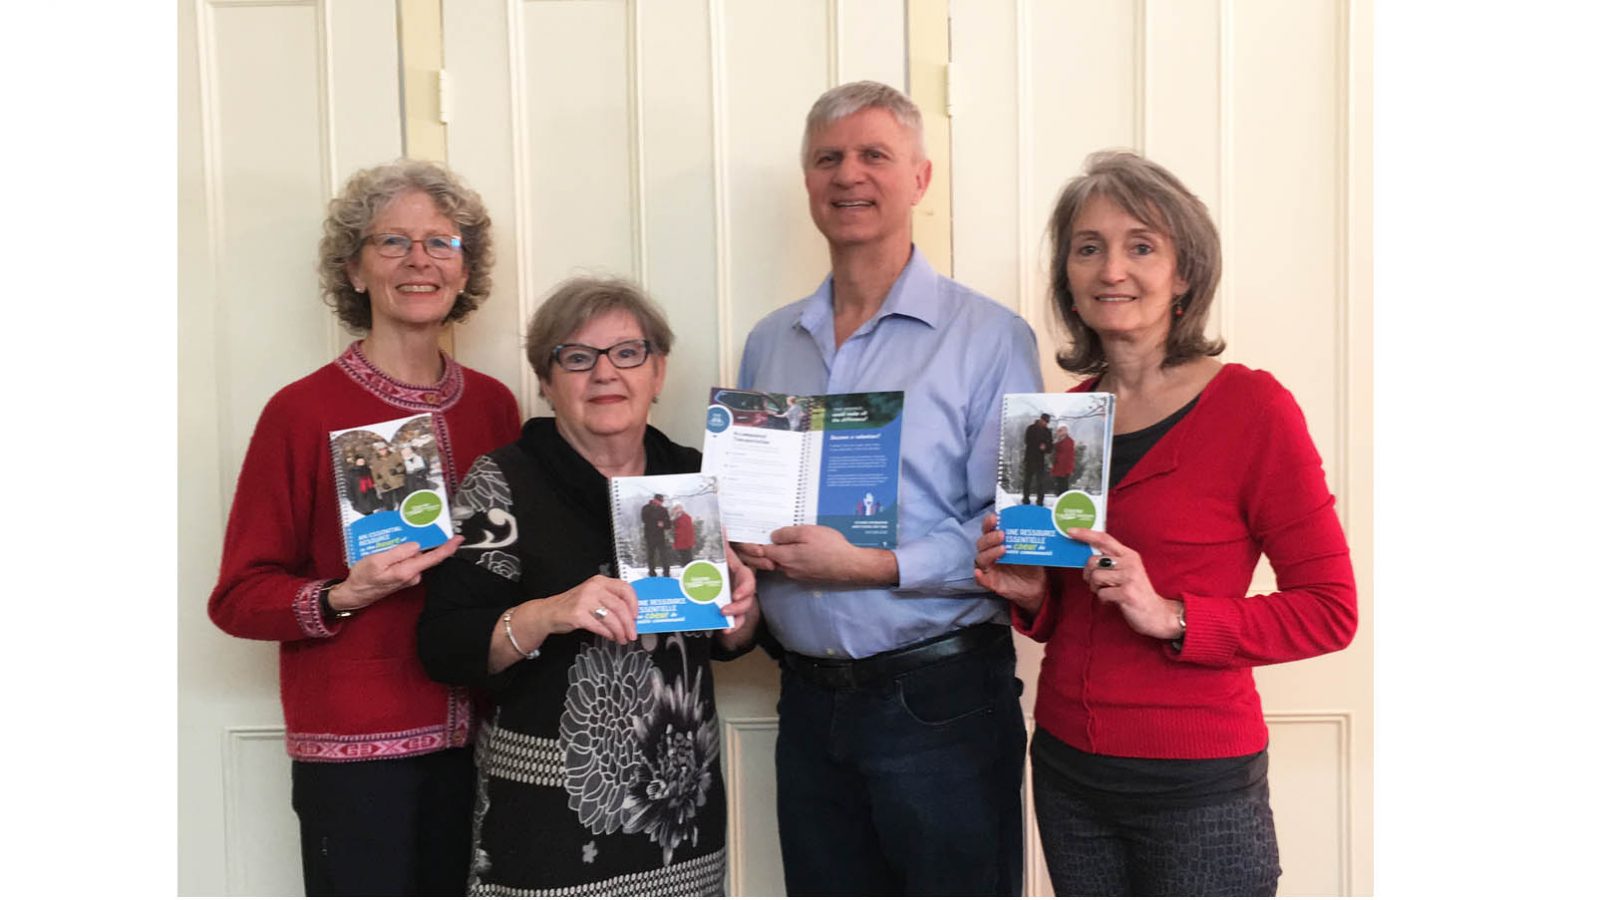 Richmond Volunteer Center launches new booklet to promote resources and encourage volunteerism